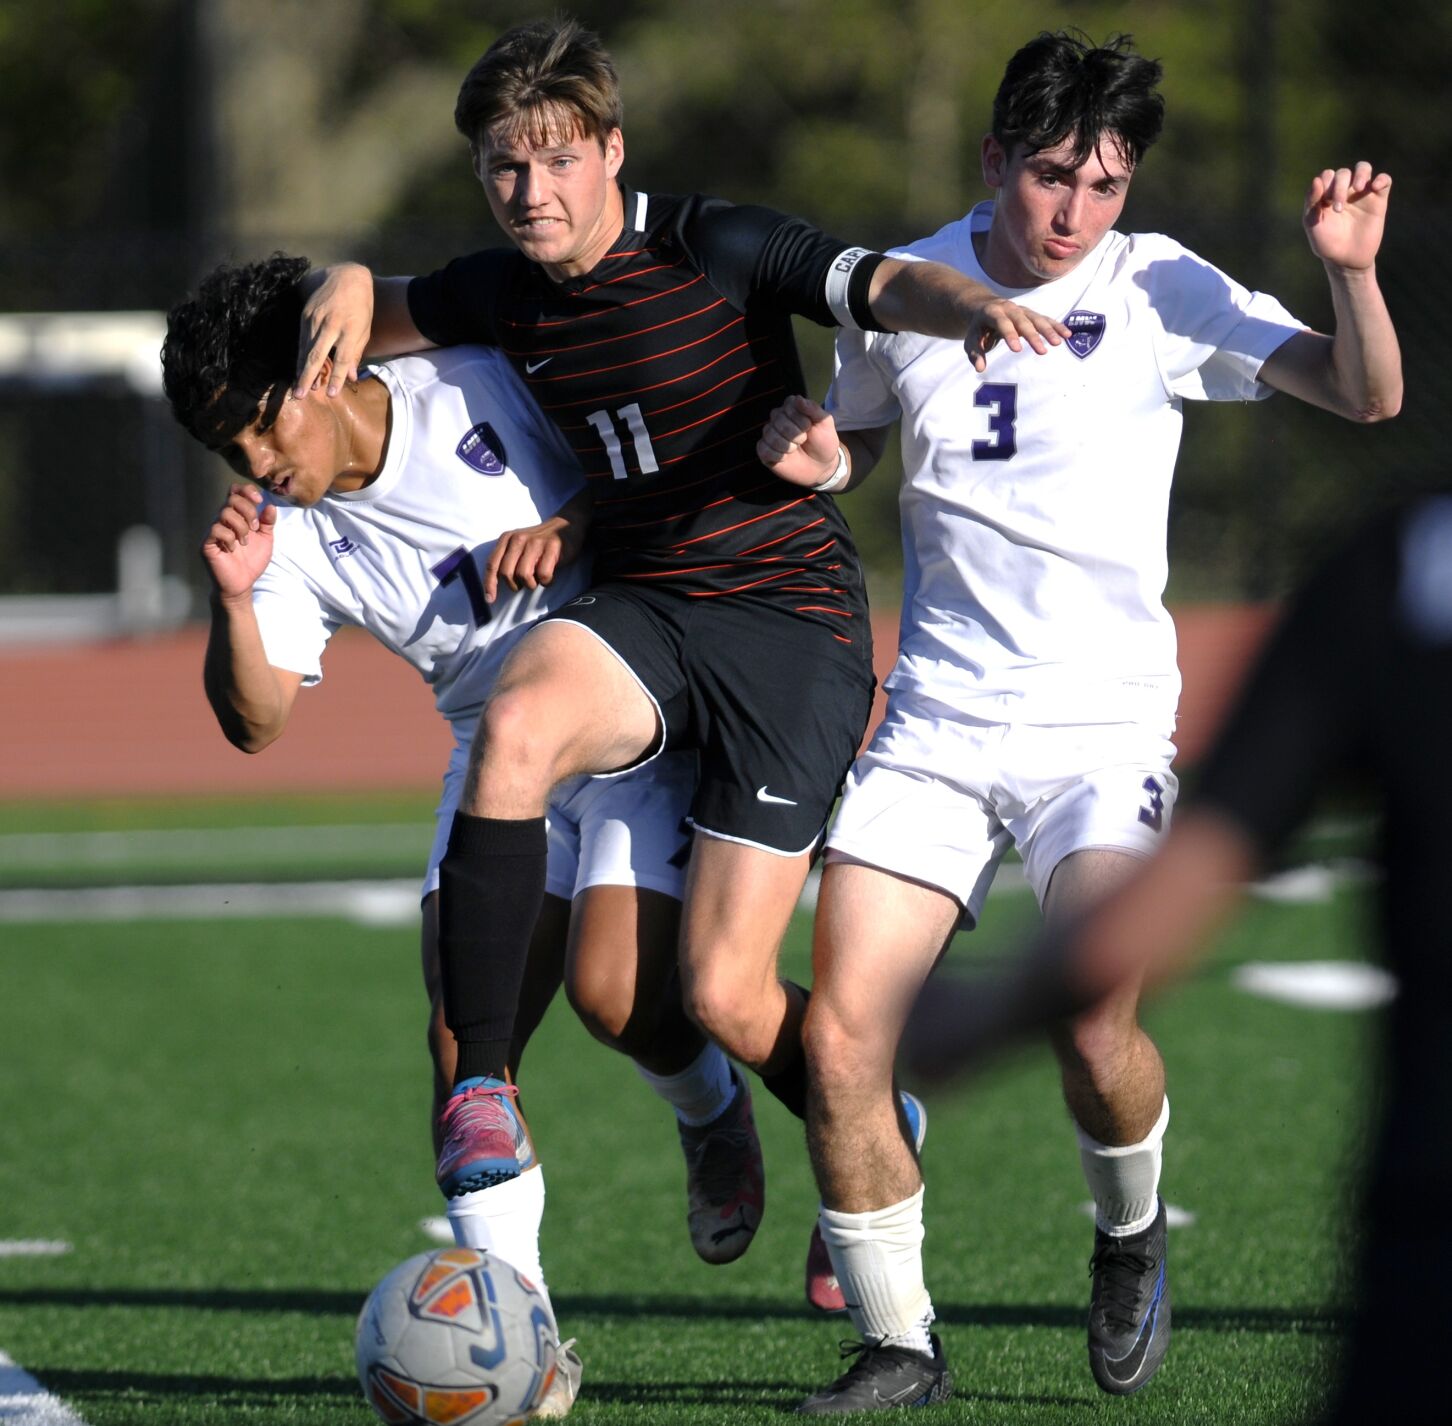 Orangemen soccer season ends with loss to Lincoln NW